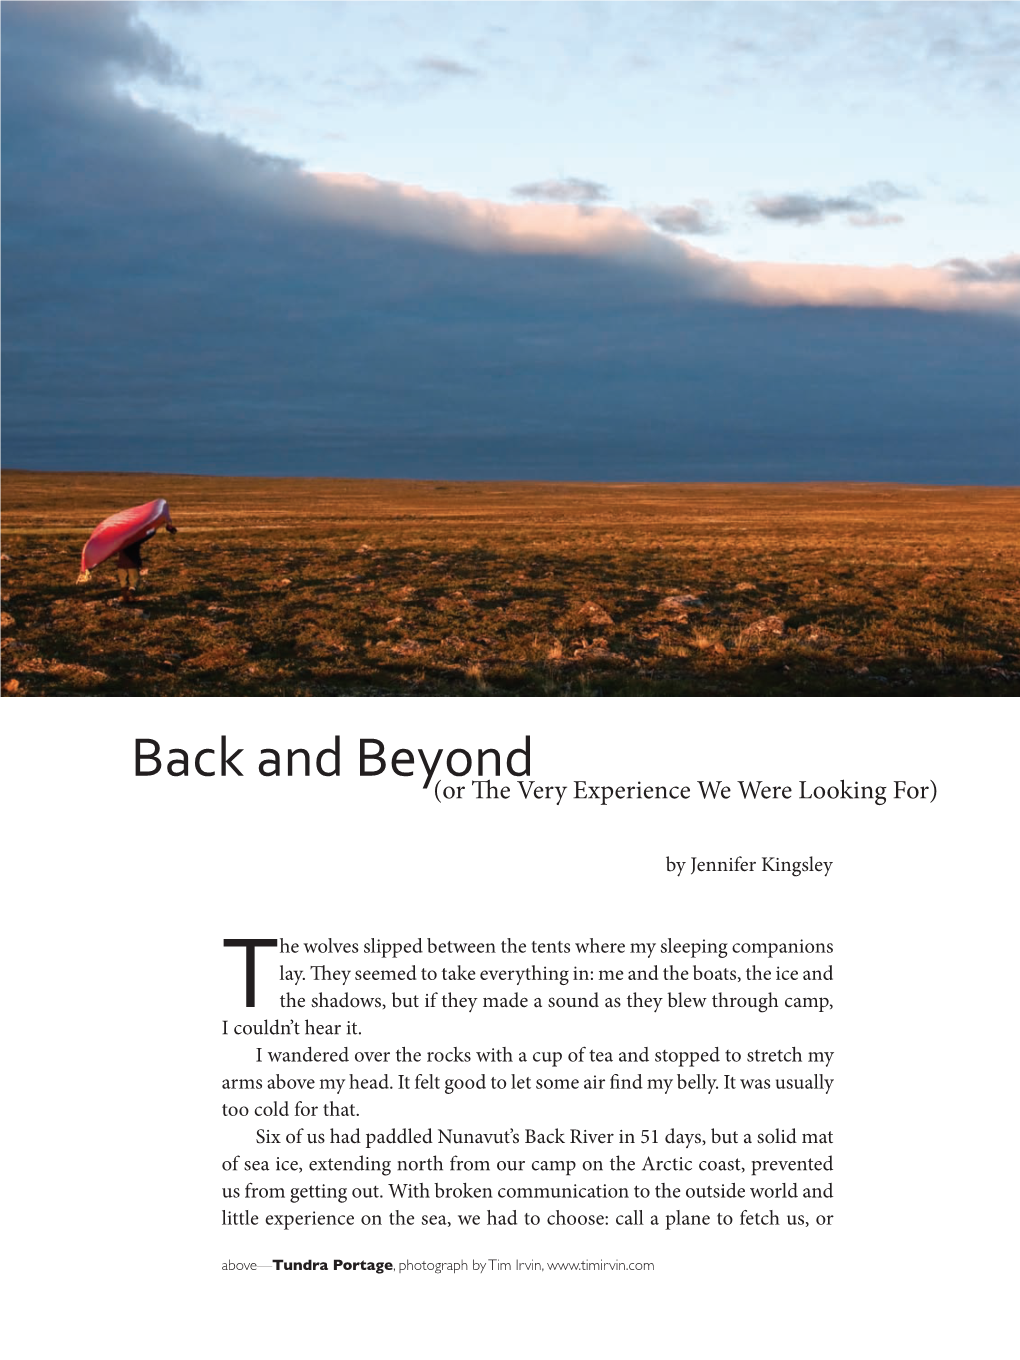 Back and Beyond (Or the Very Experience We Were Looking For)